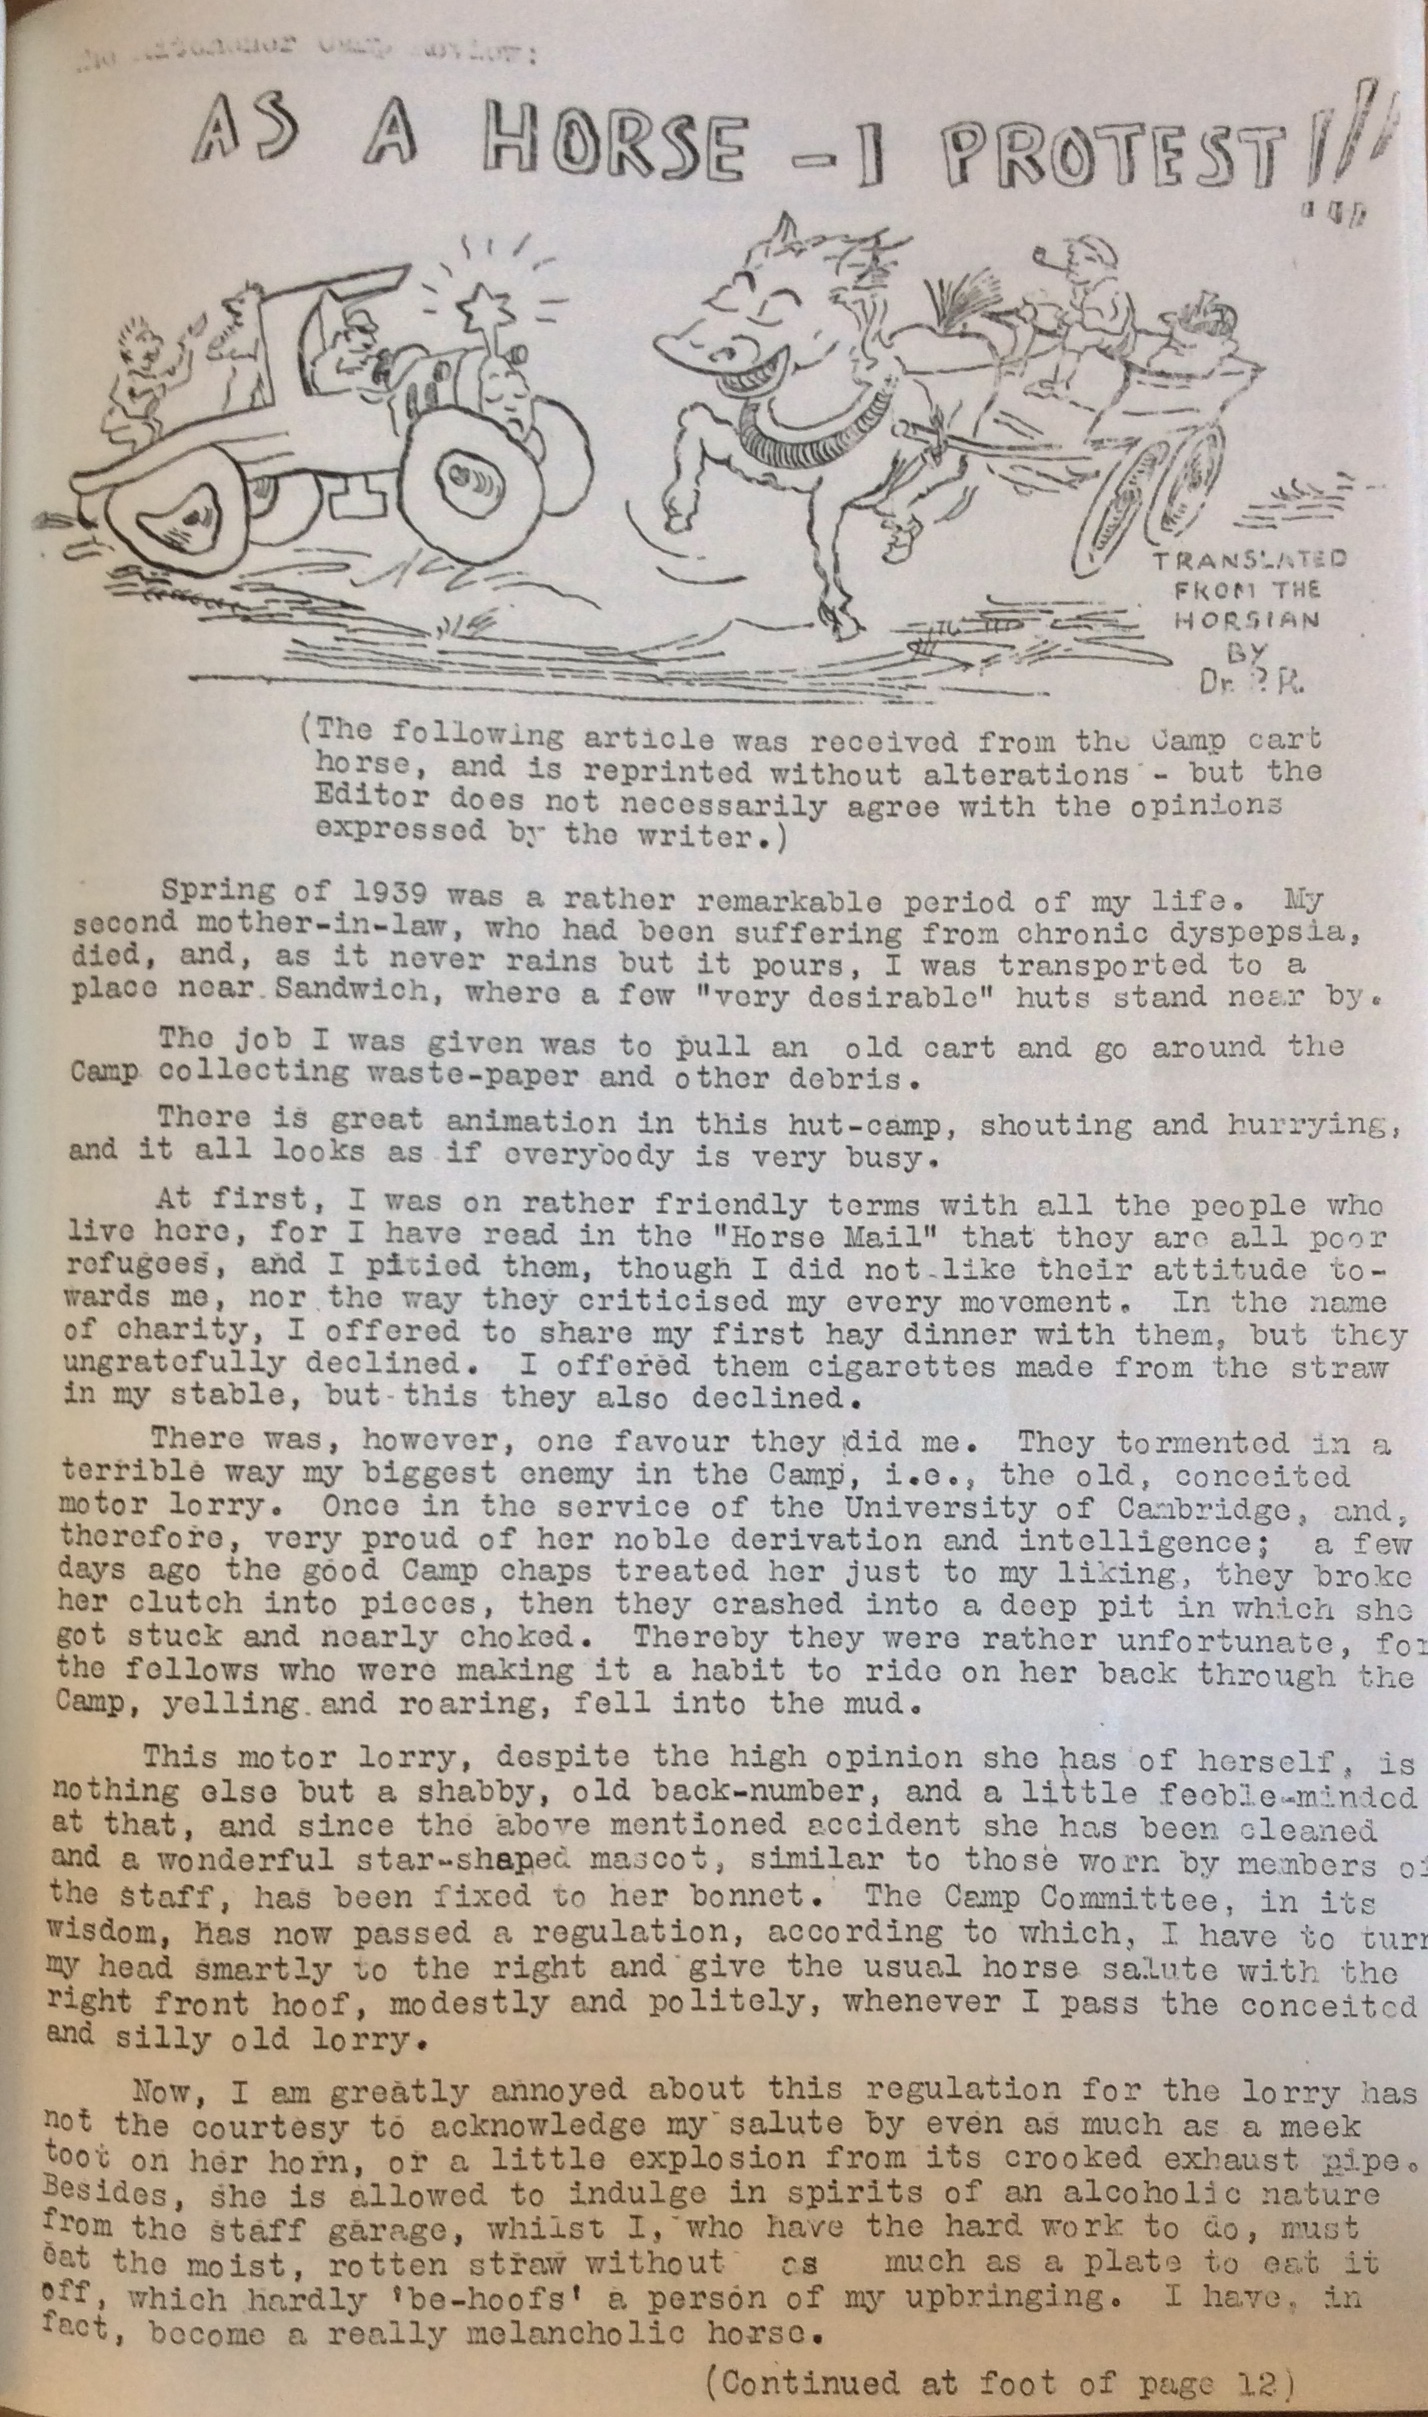 Kitchener Camp Review, June 1939, page 7